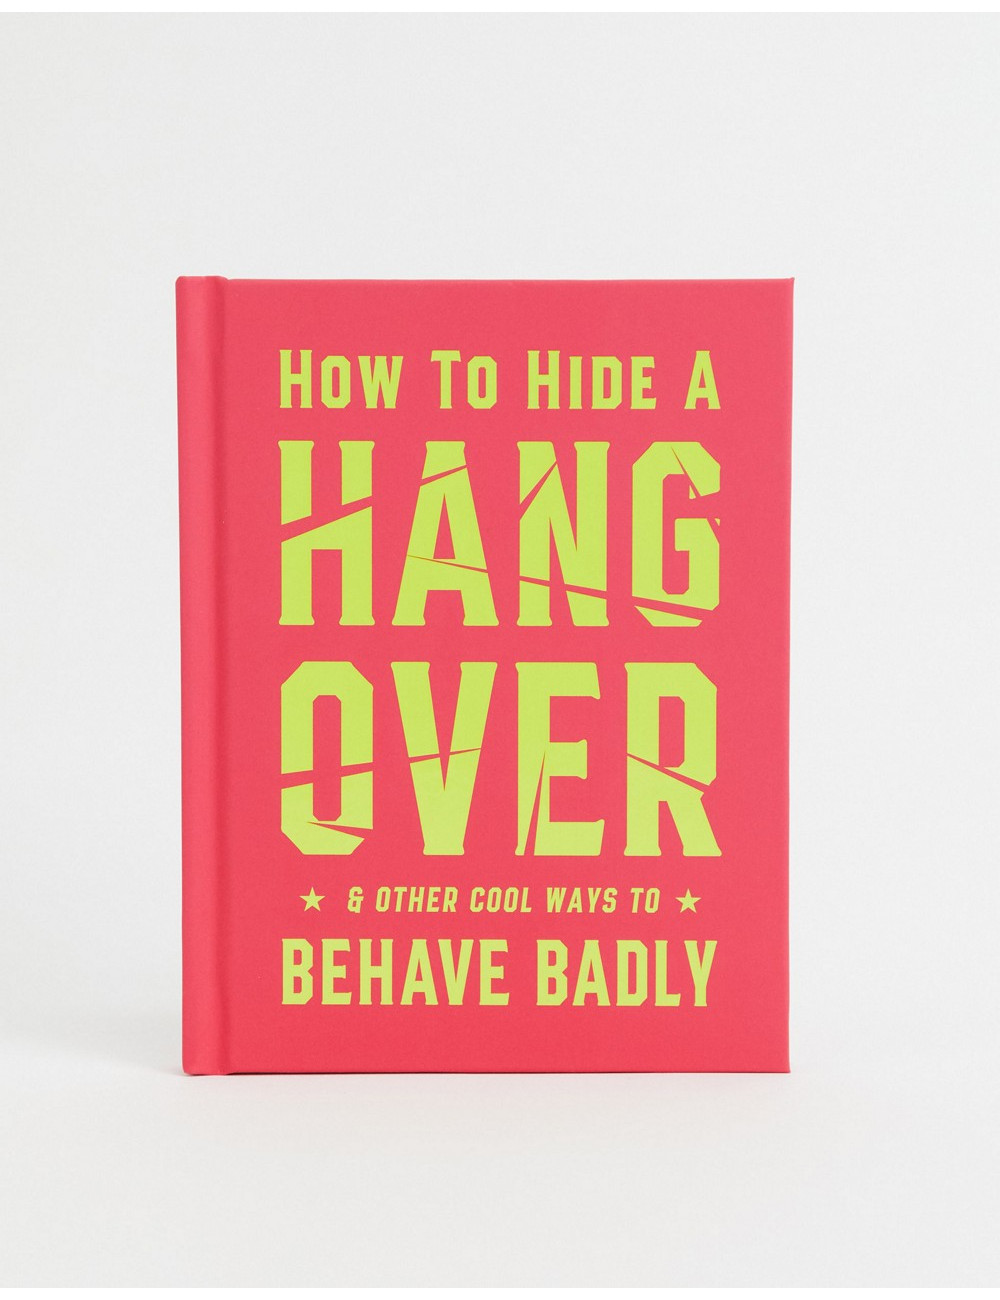 How to Hide a Hangover book